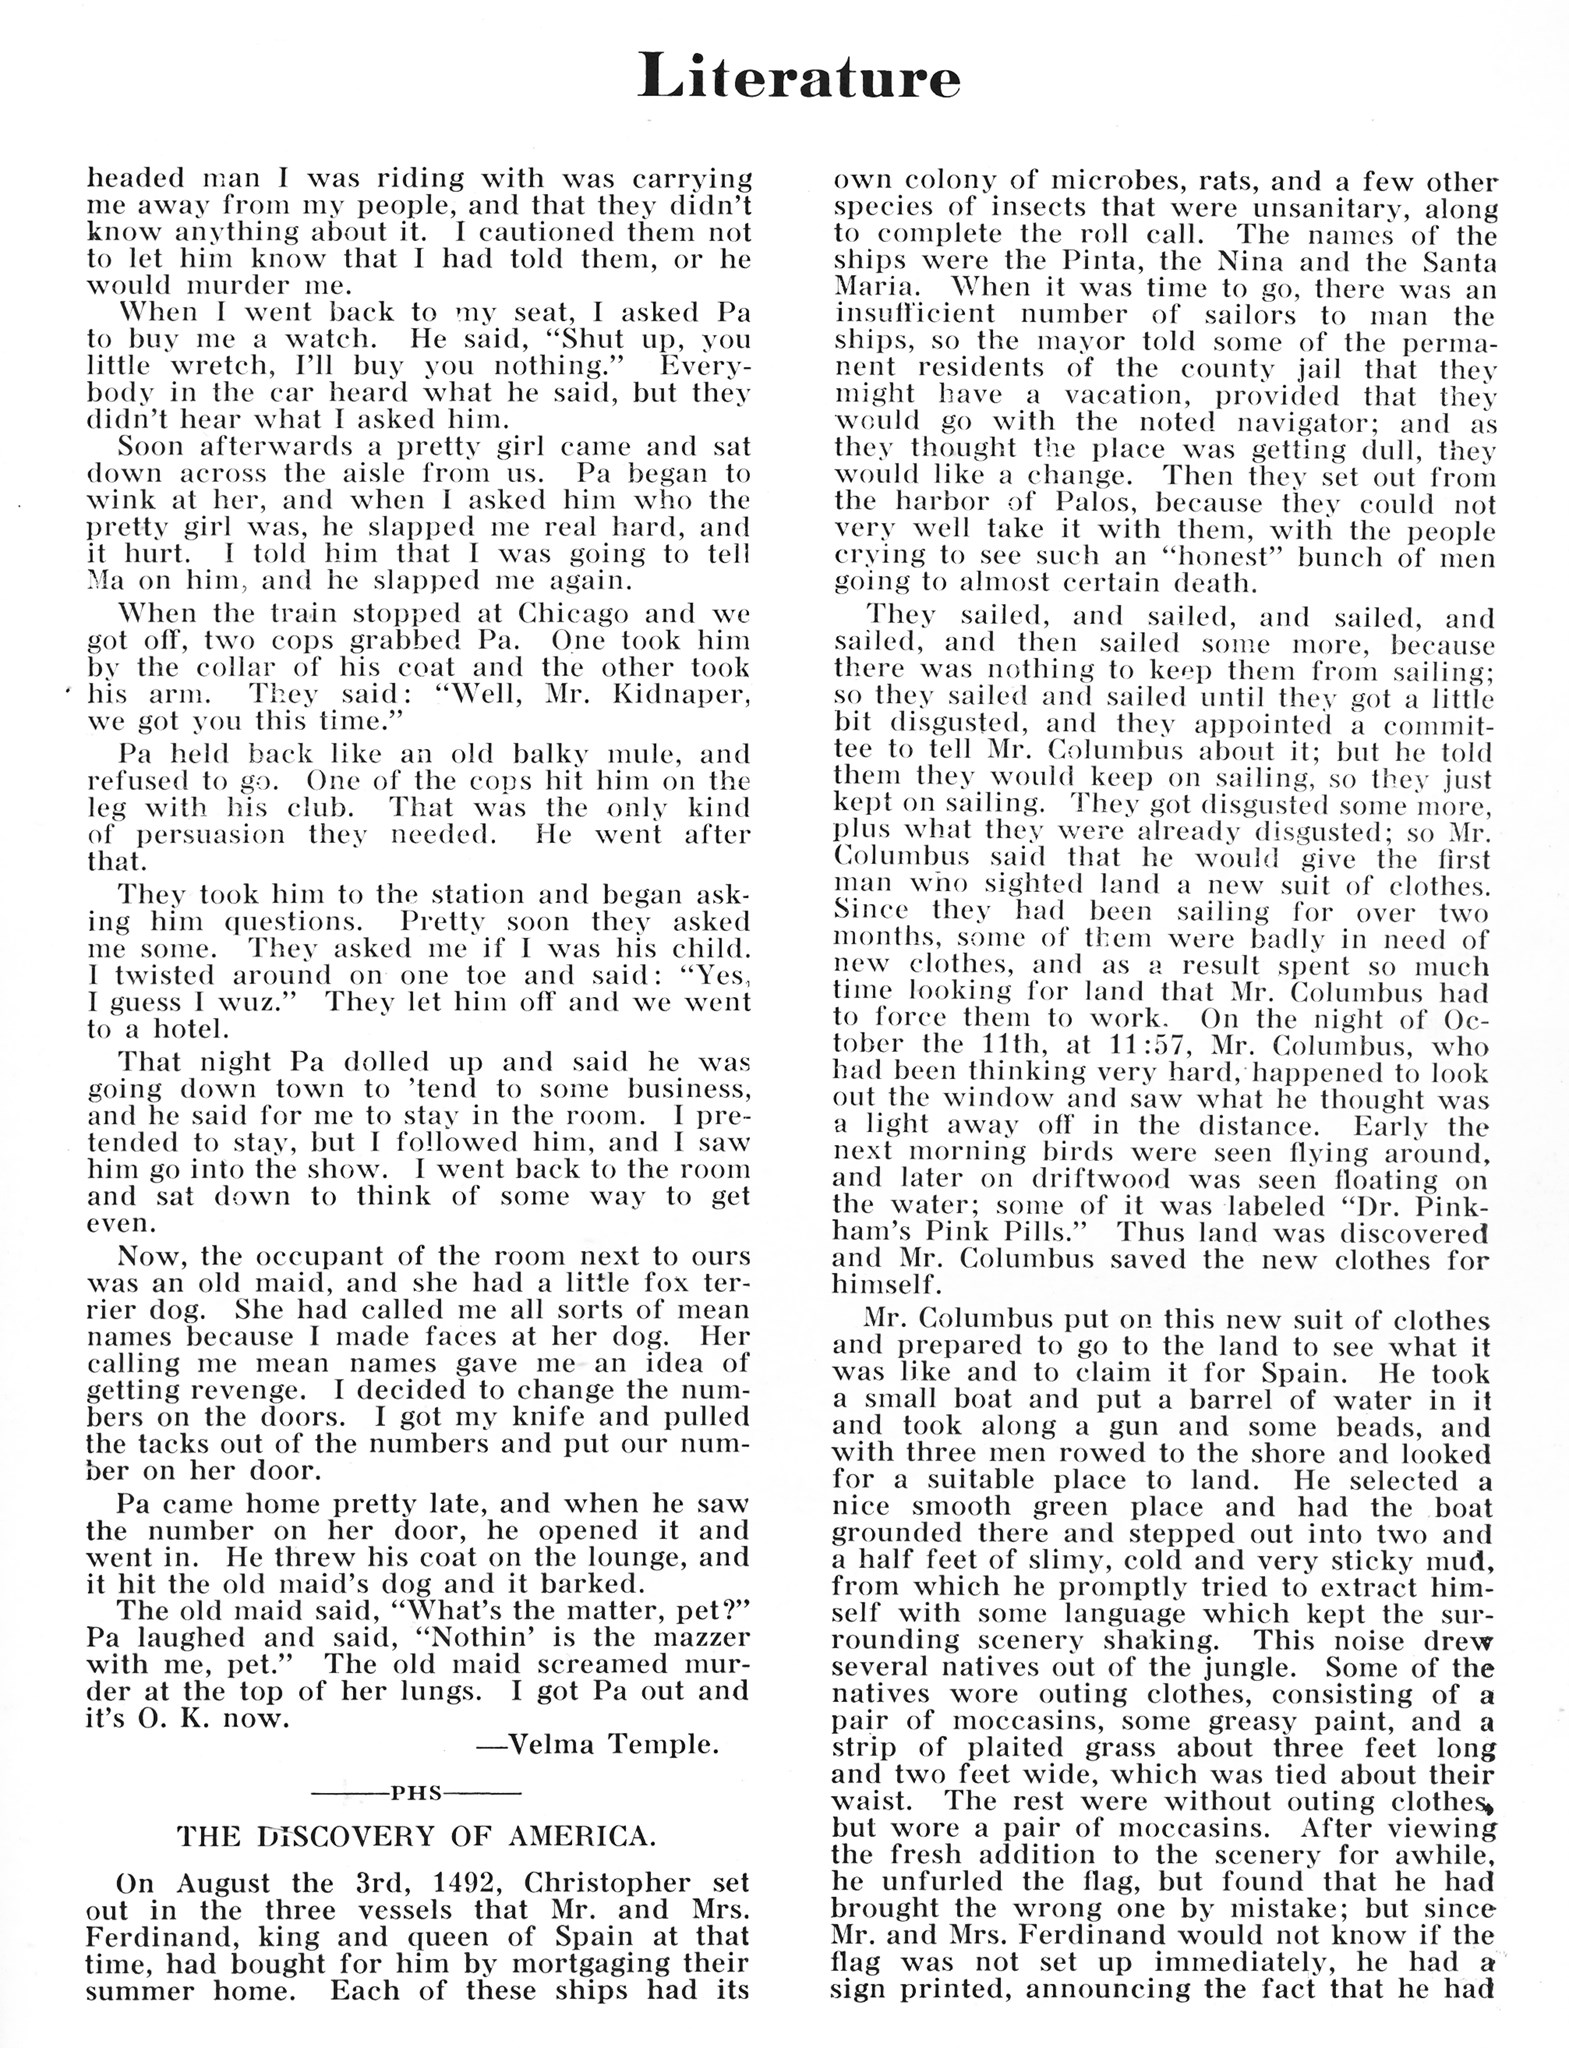 ../../../Images/Large/1915/Arclight-1915-pg0079.jpg